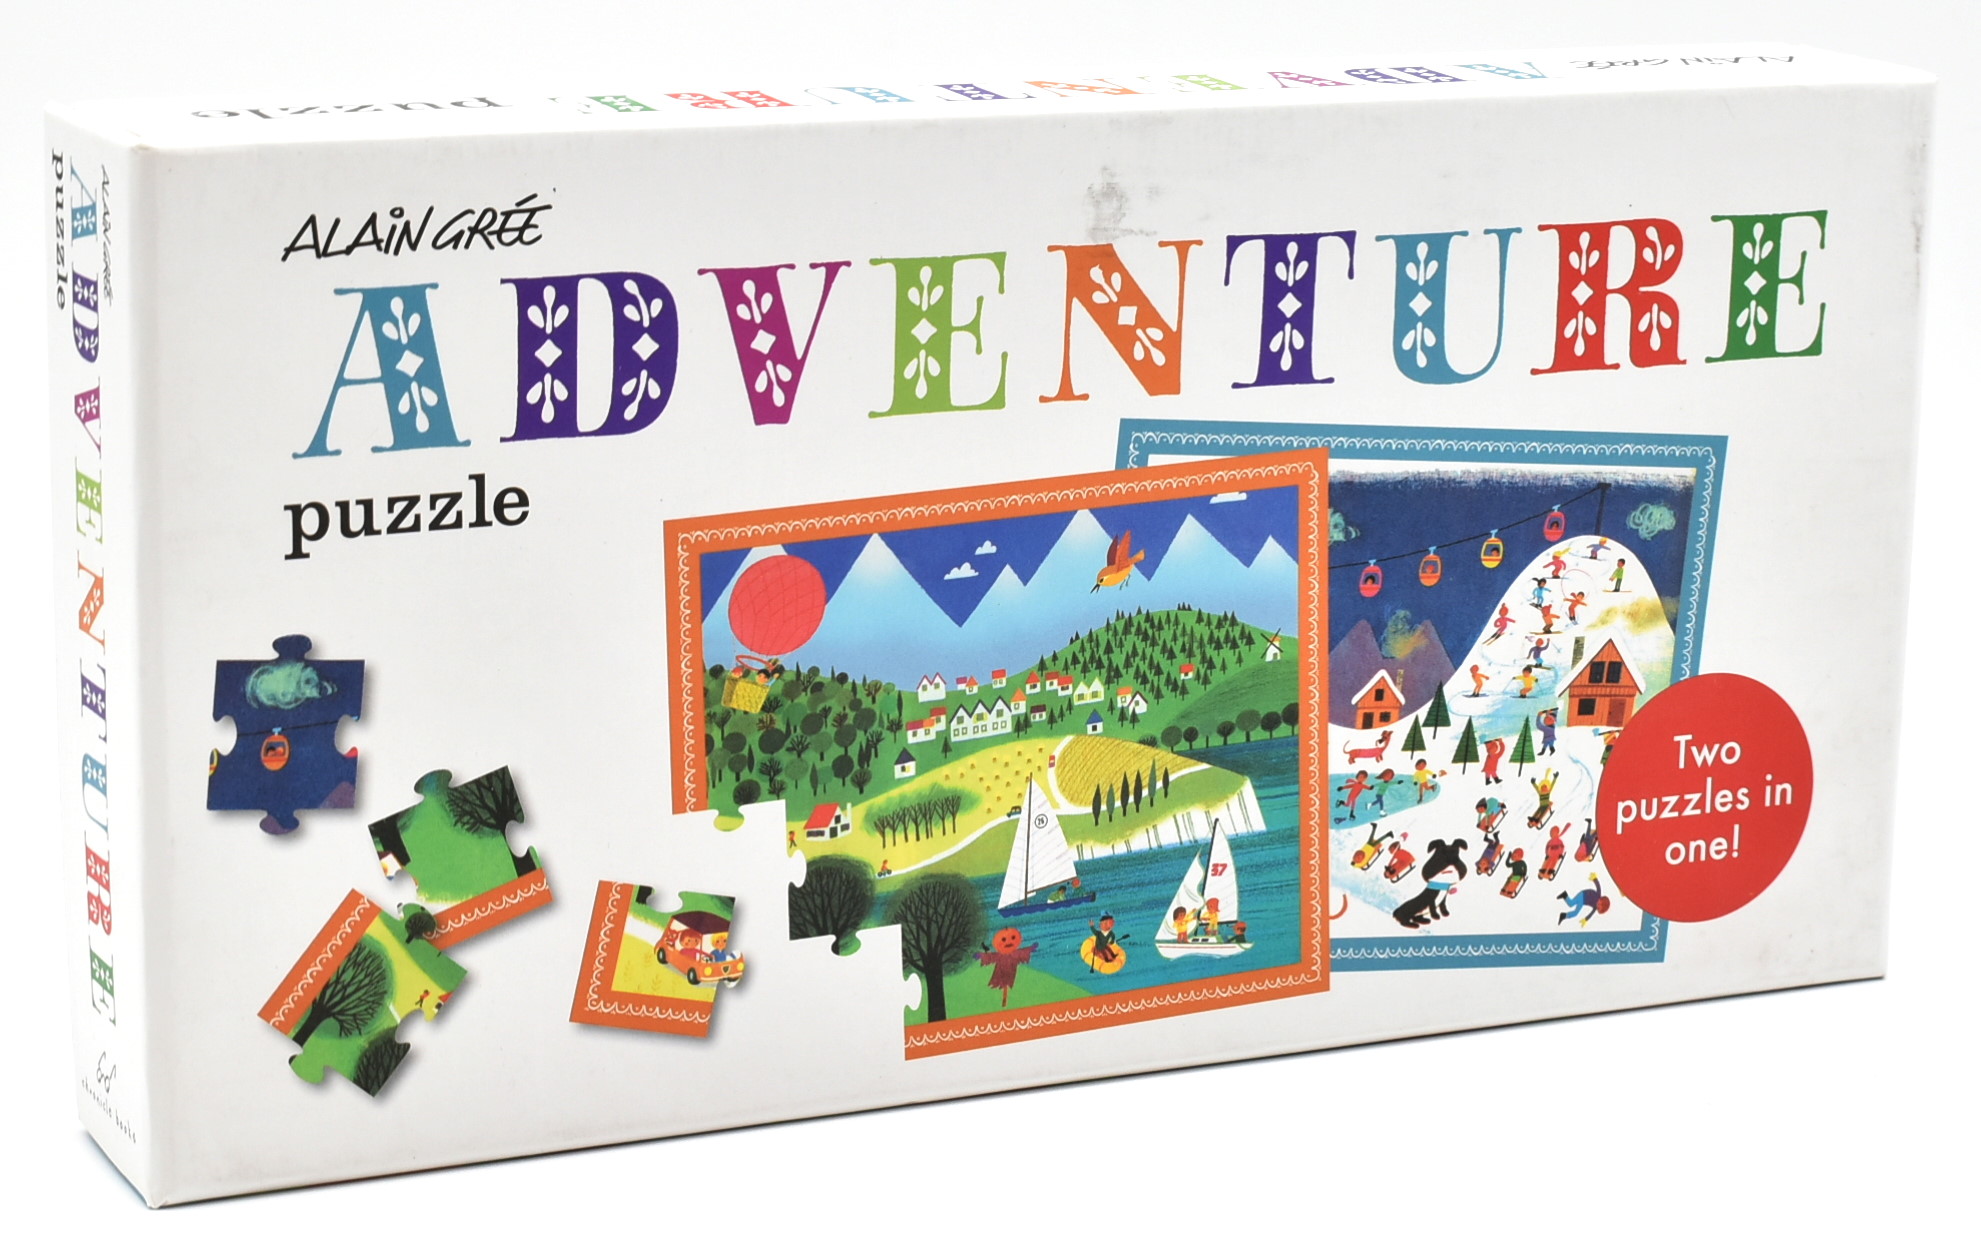 PUZZLE,  BOXED ALAIN GREE ADVENTURE. PP 17.99